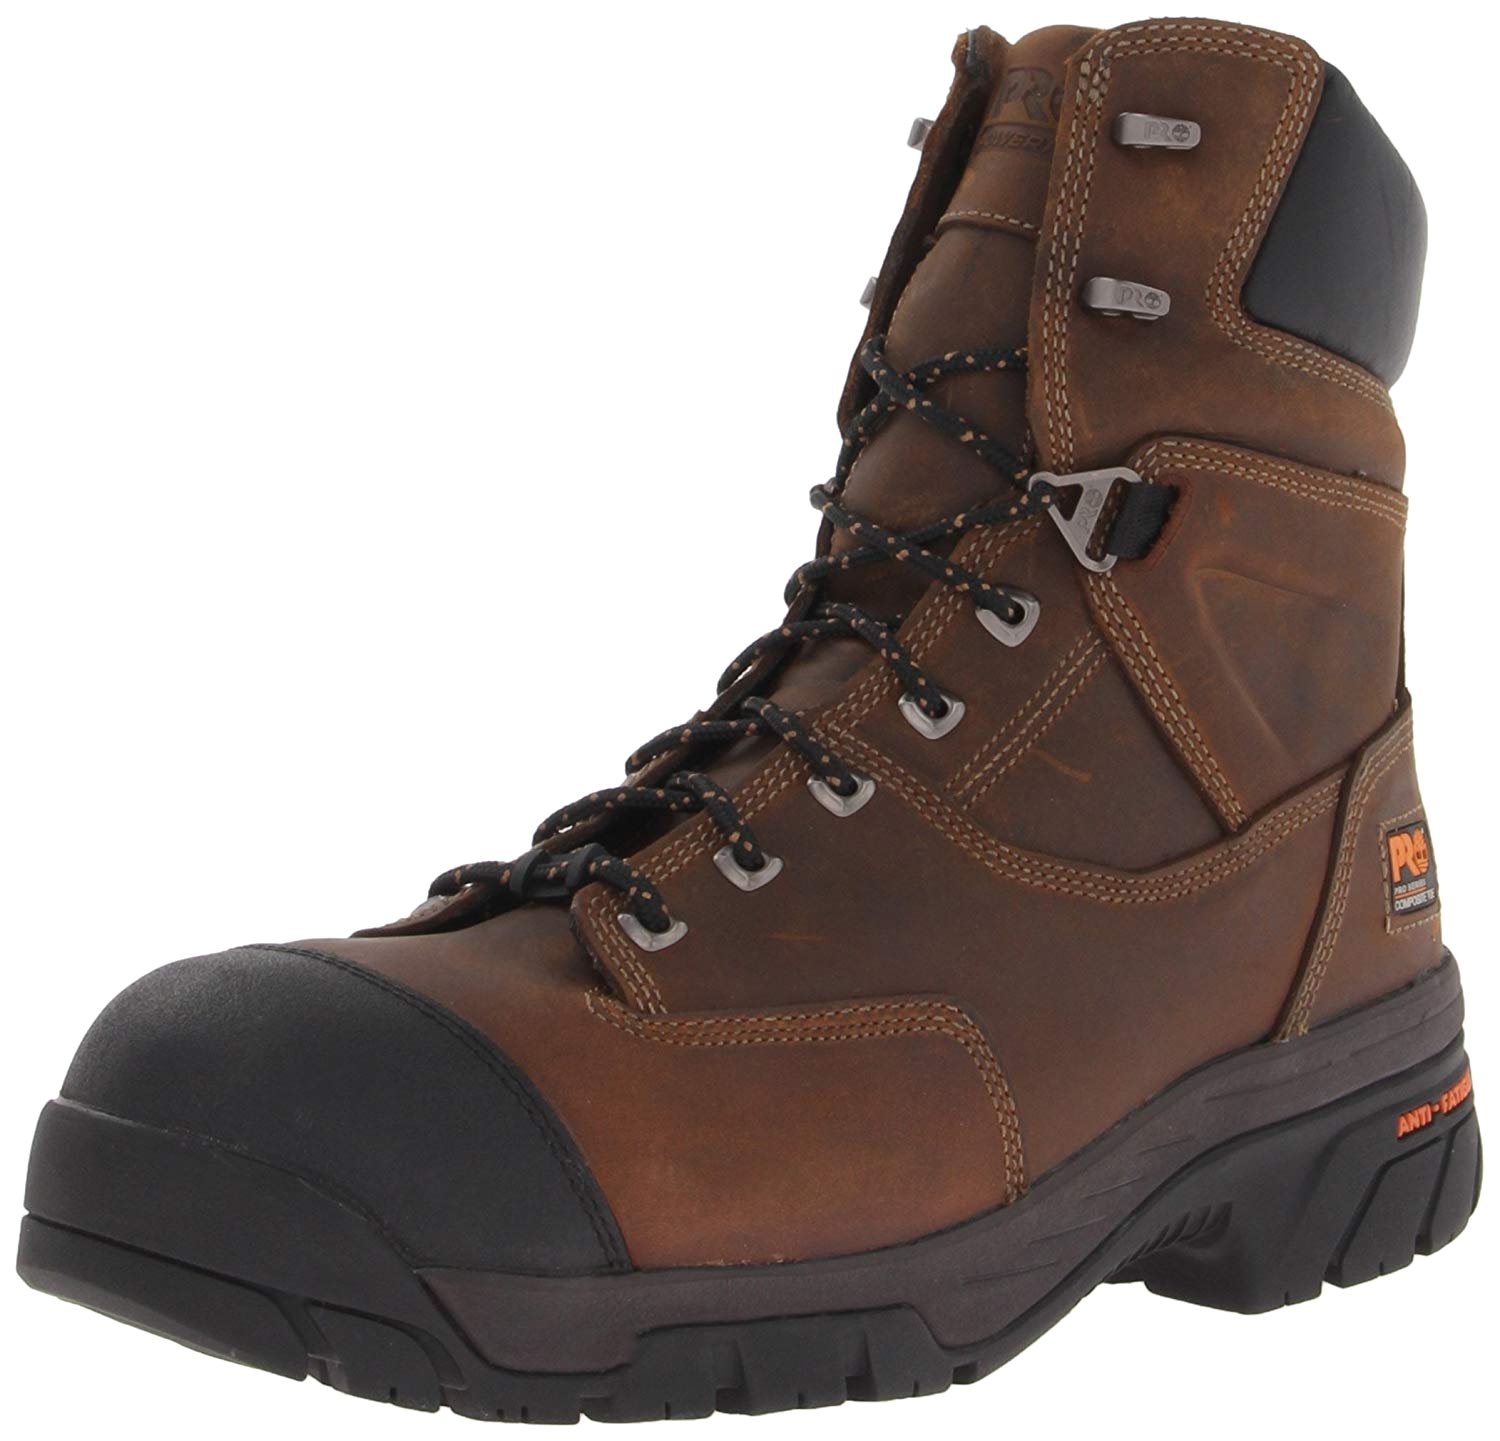 amazon com timberland pro men s helix 8 insulated comp toe work boot shoes